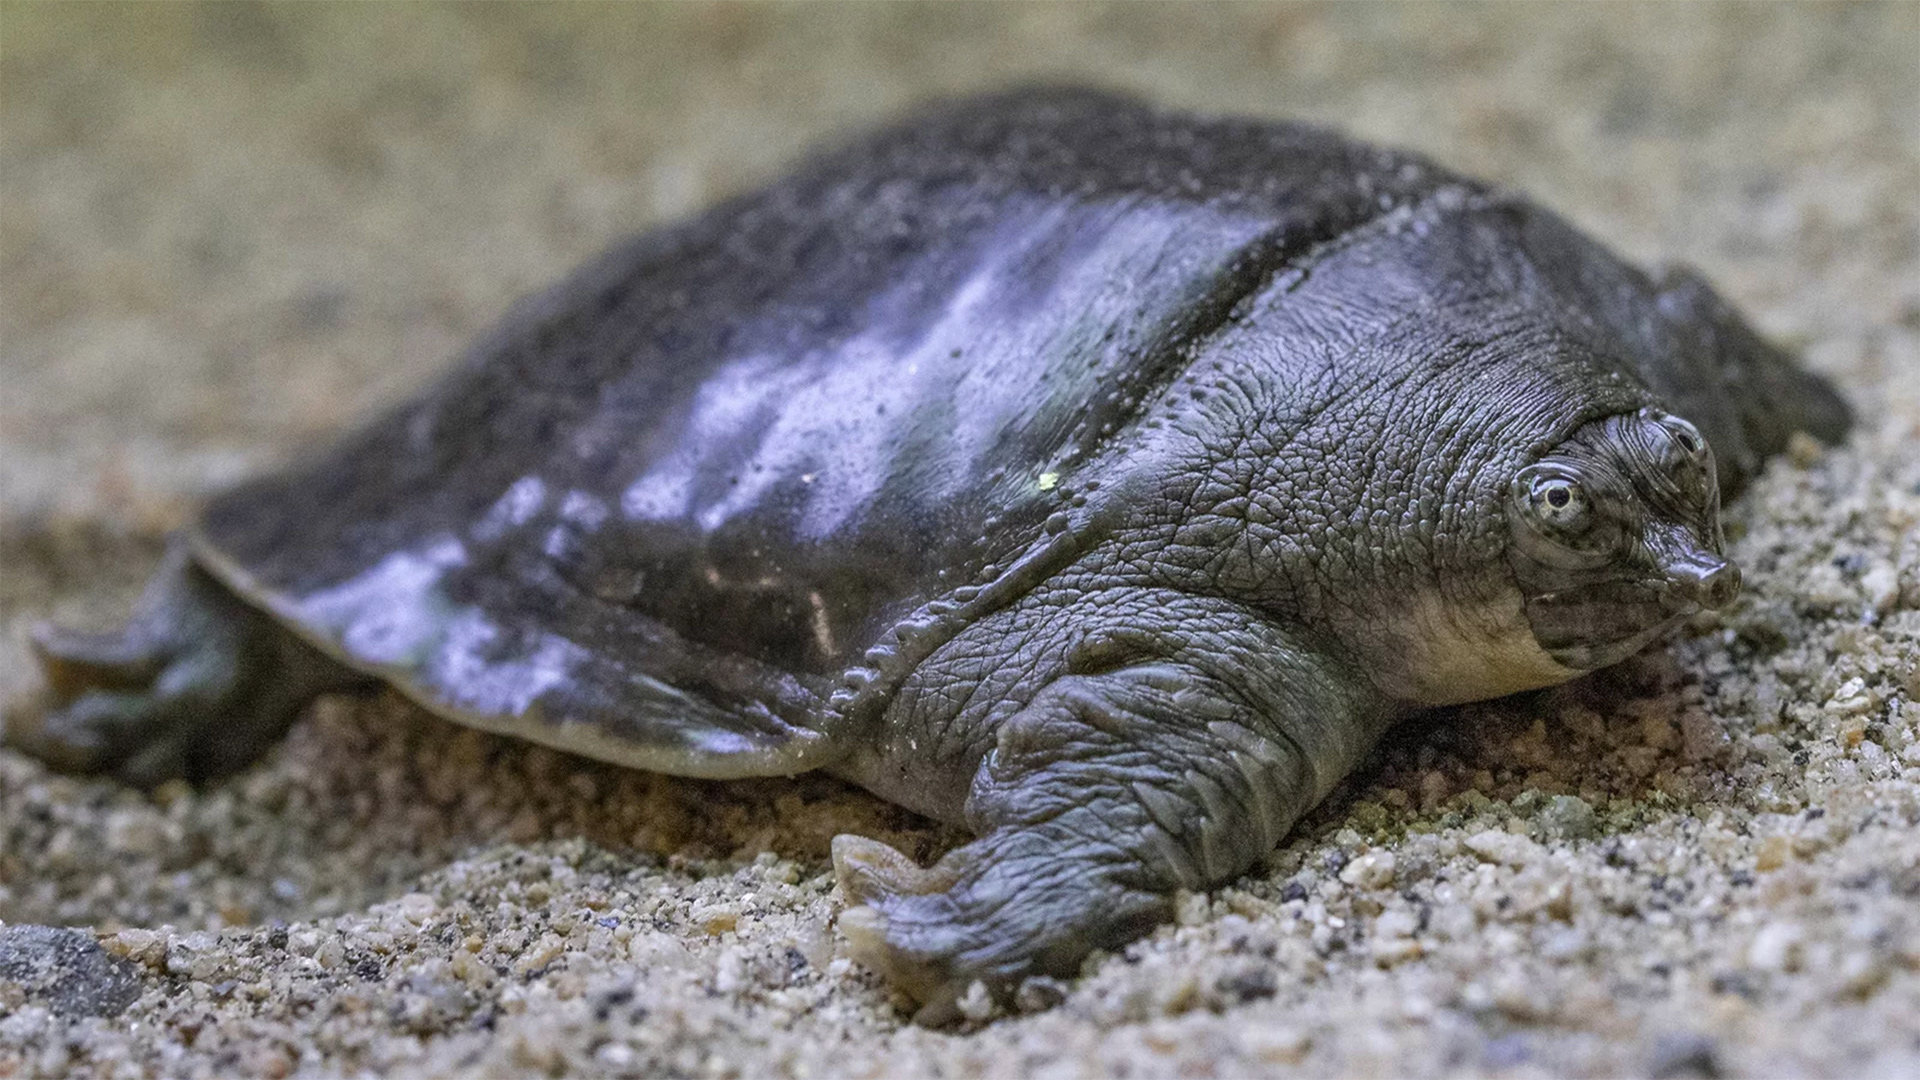 One of the Indian narrow-headed softshell turtle hatchlings bred at the San Diego Zoo.